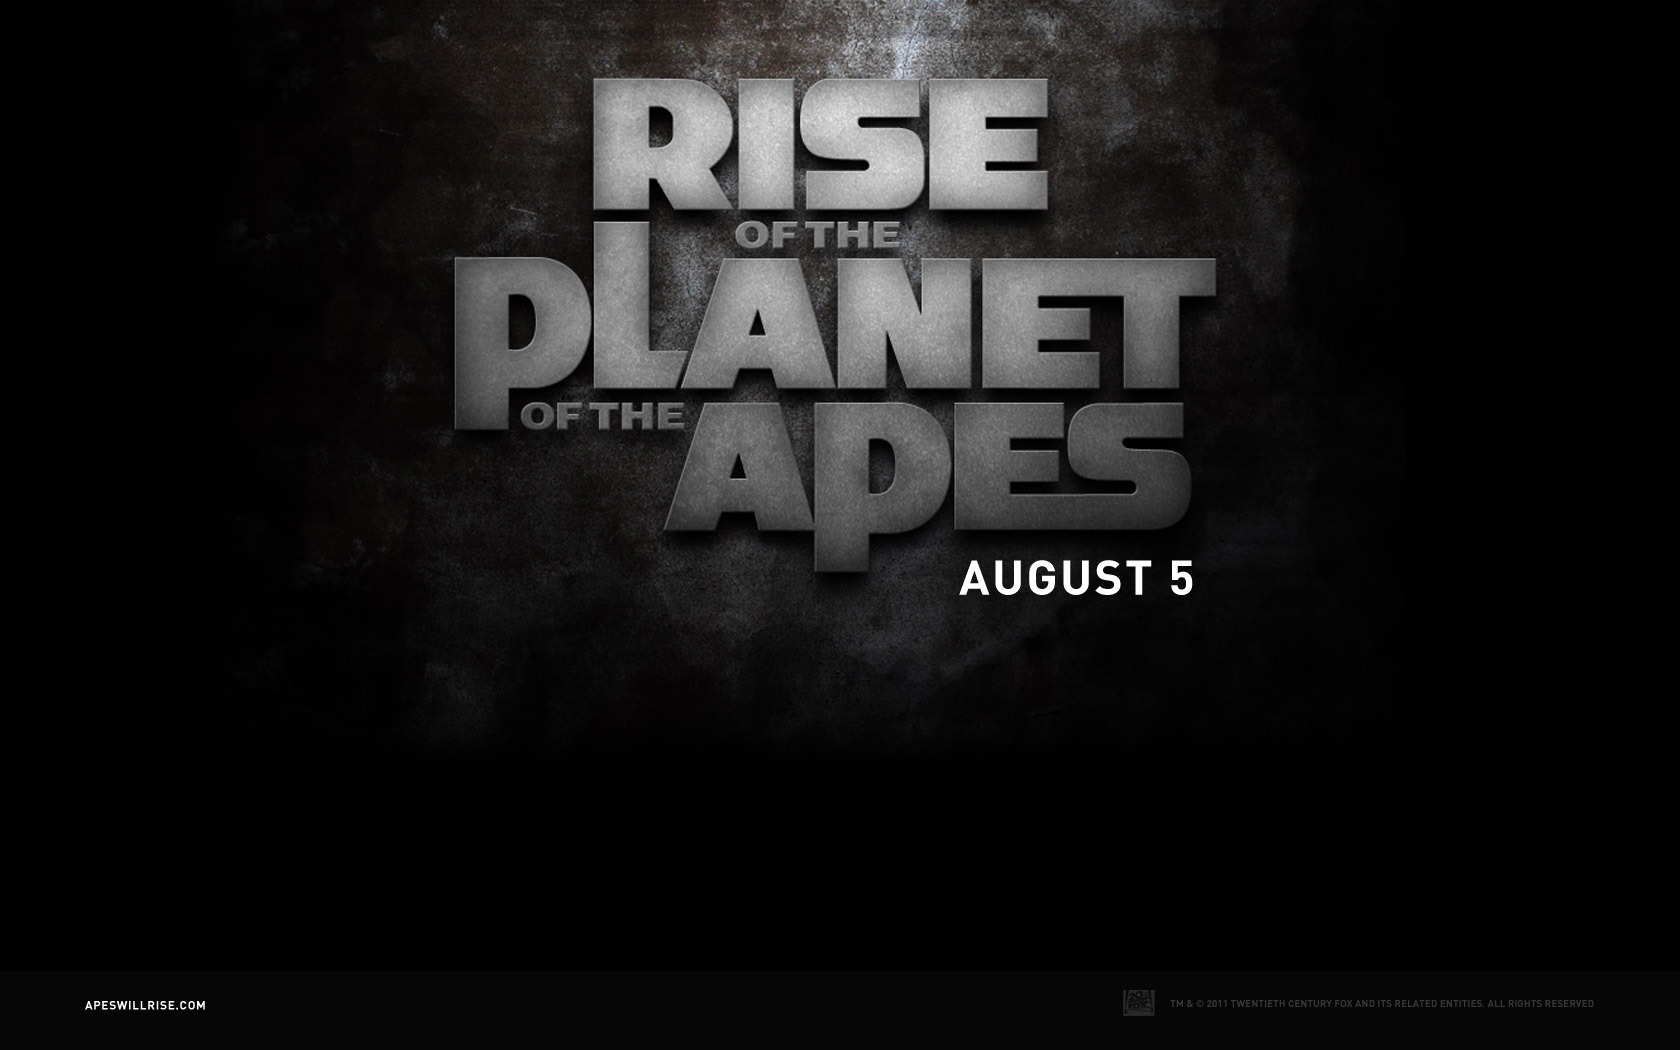 Rise of the Planet of the Apes 猿族崛起壁紙專輯 #7 - 1680x1050